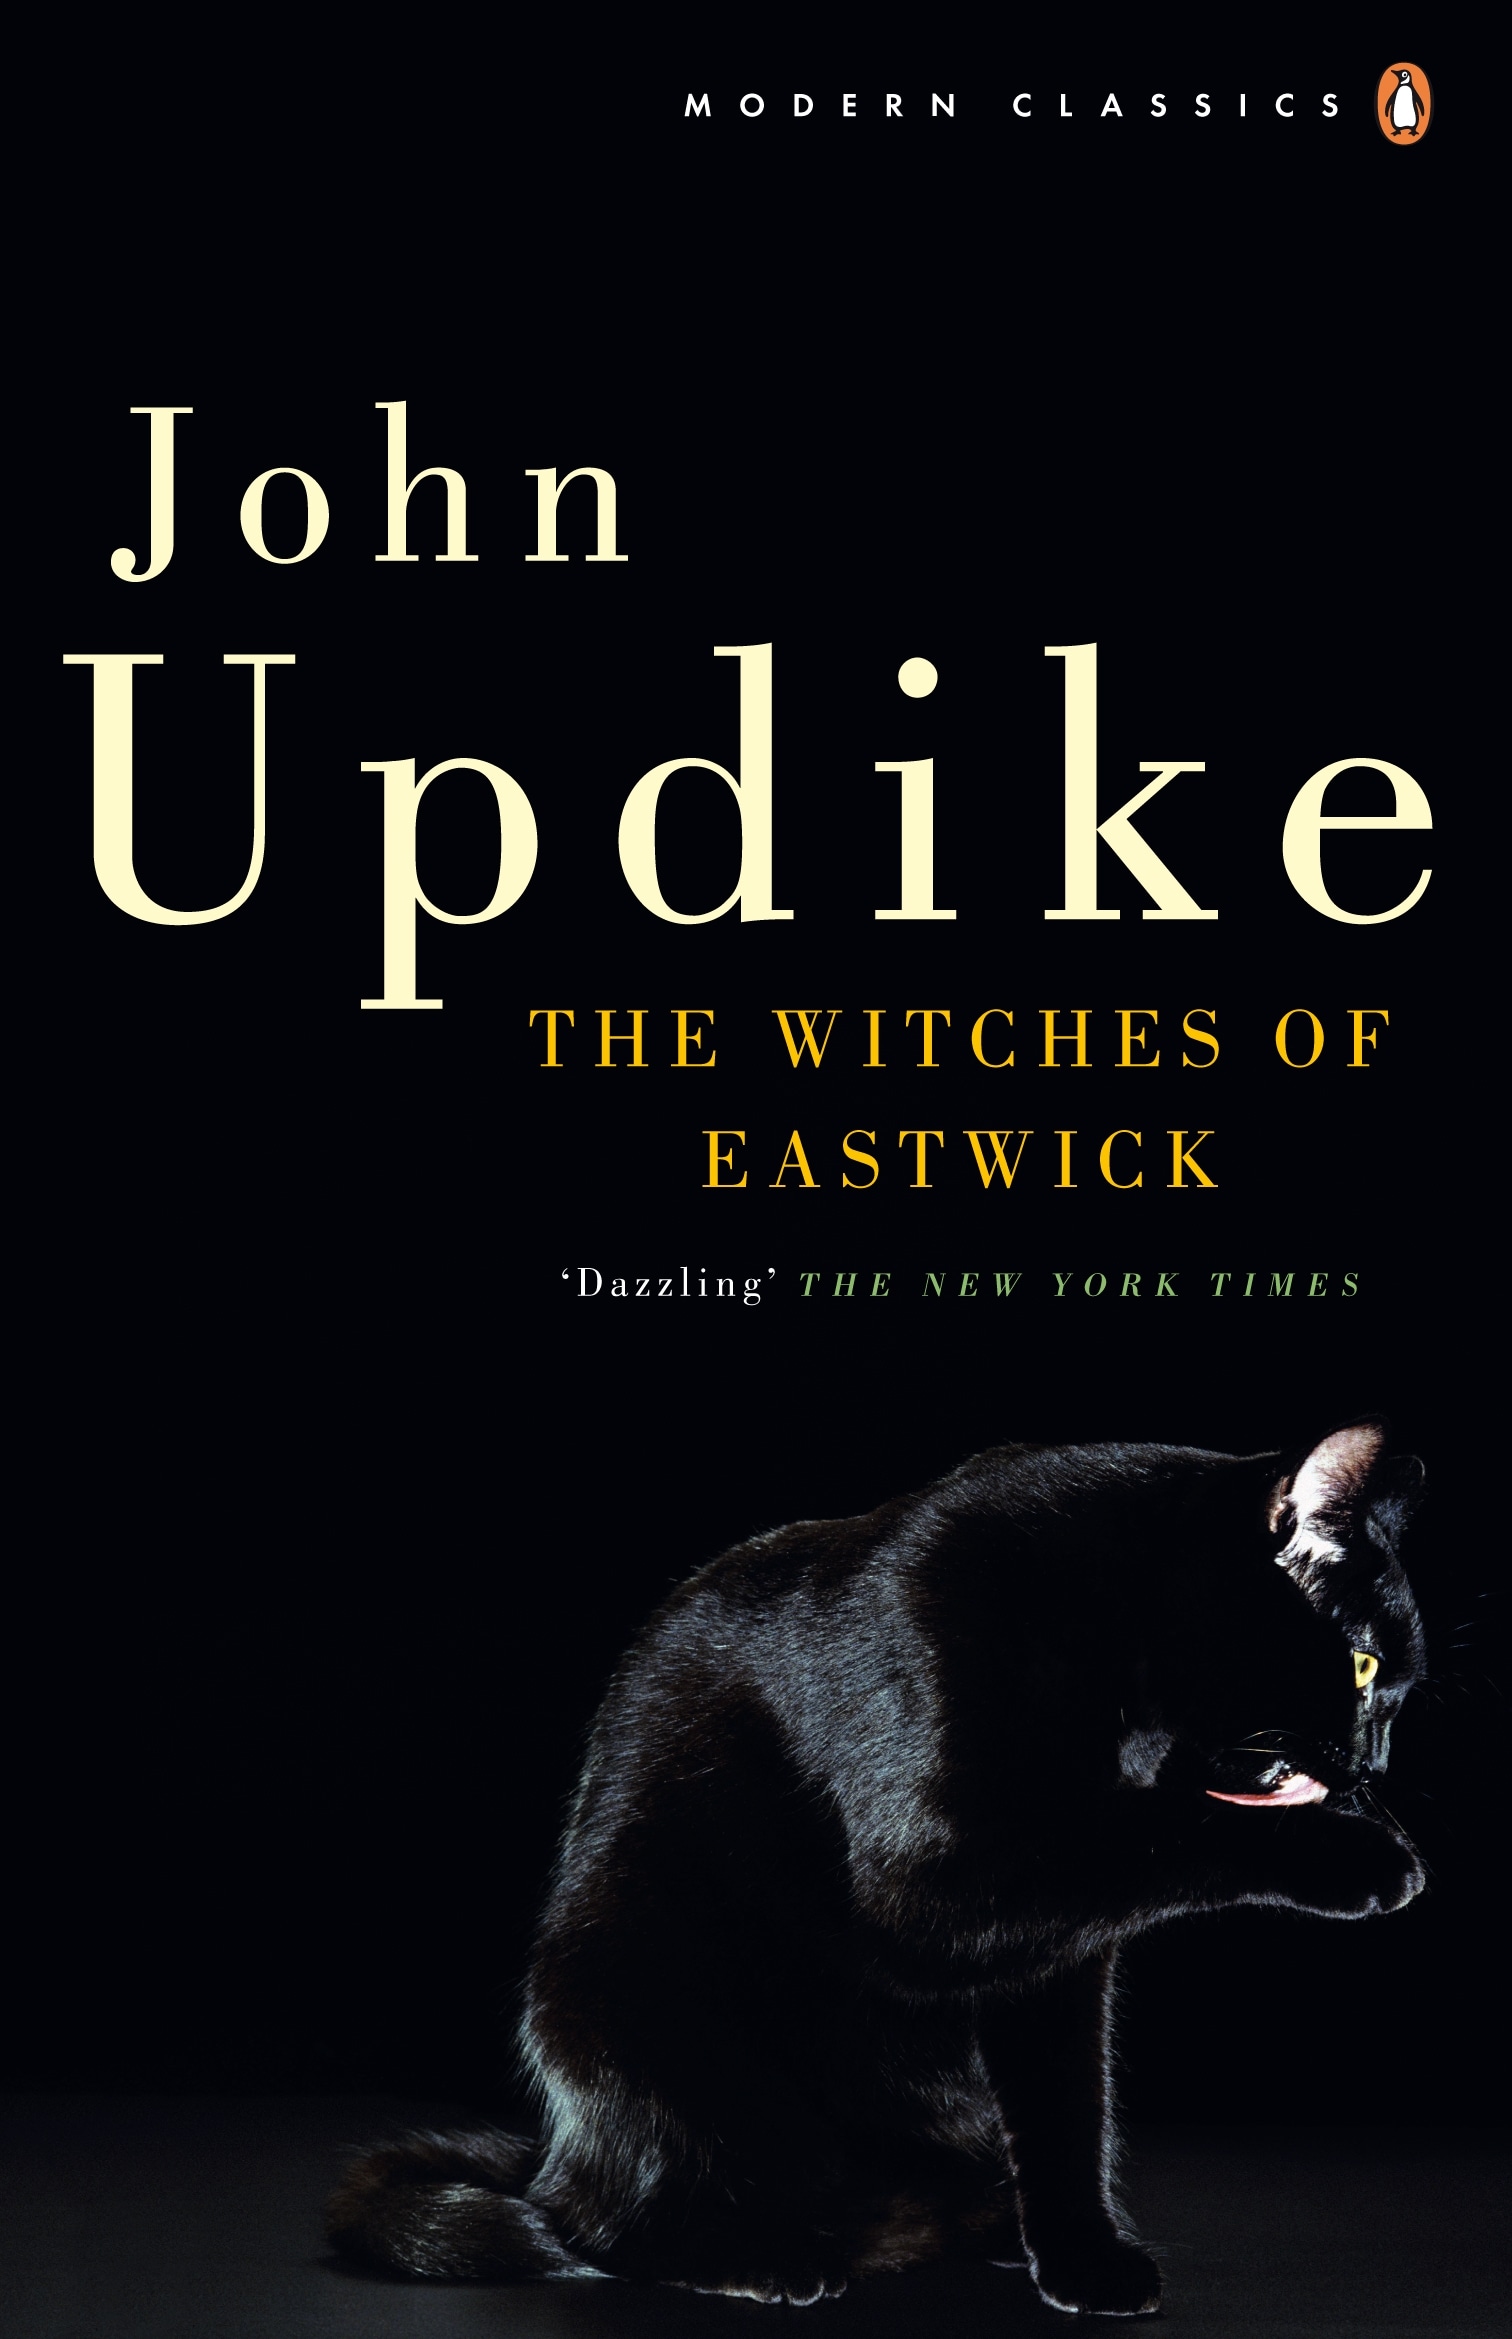 Book “The Witches of Eastwick” by John Updike — February 22, 2007